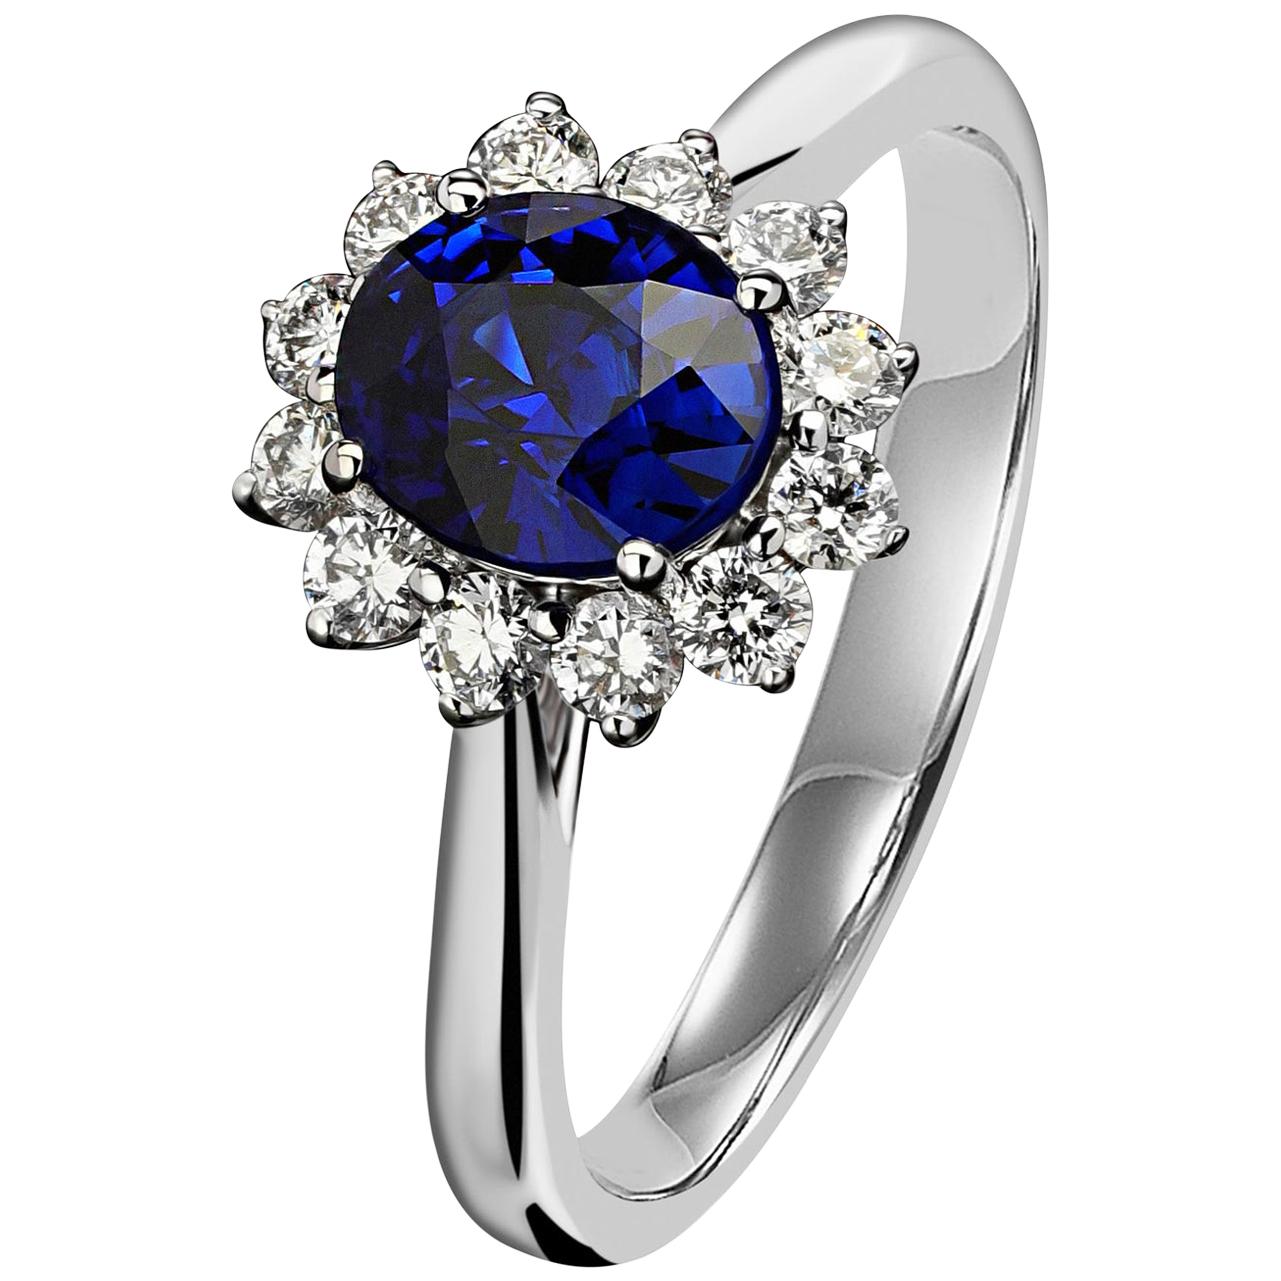 Sapphire Royal Blue Diana Queen Diamond Style Gold Engagement ring